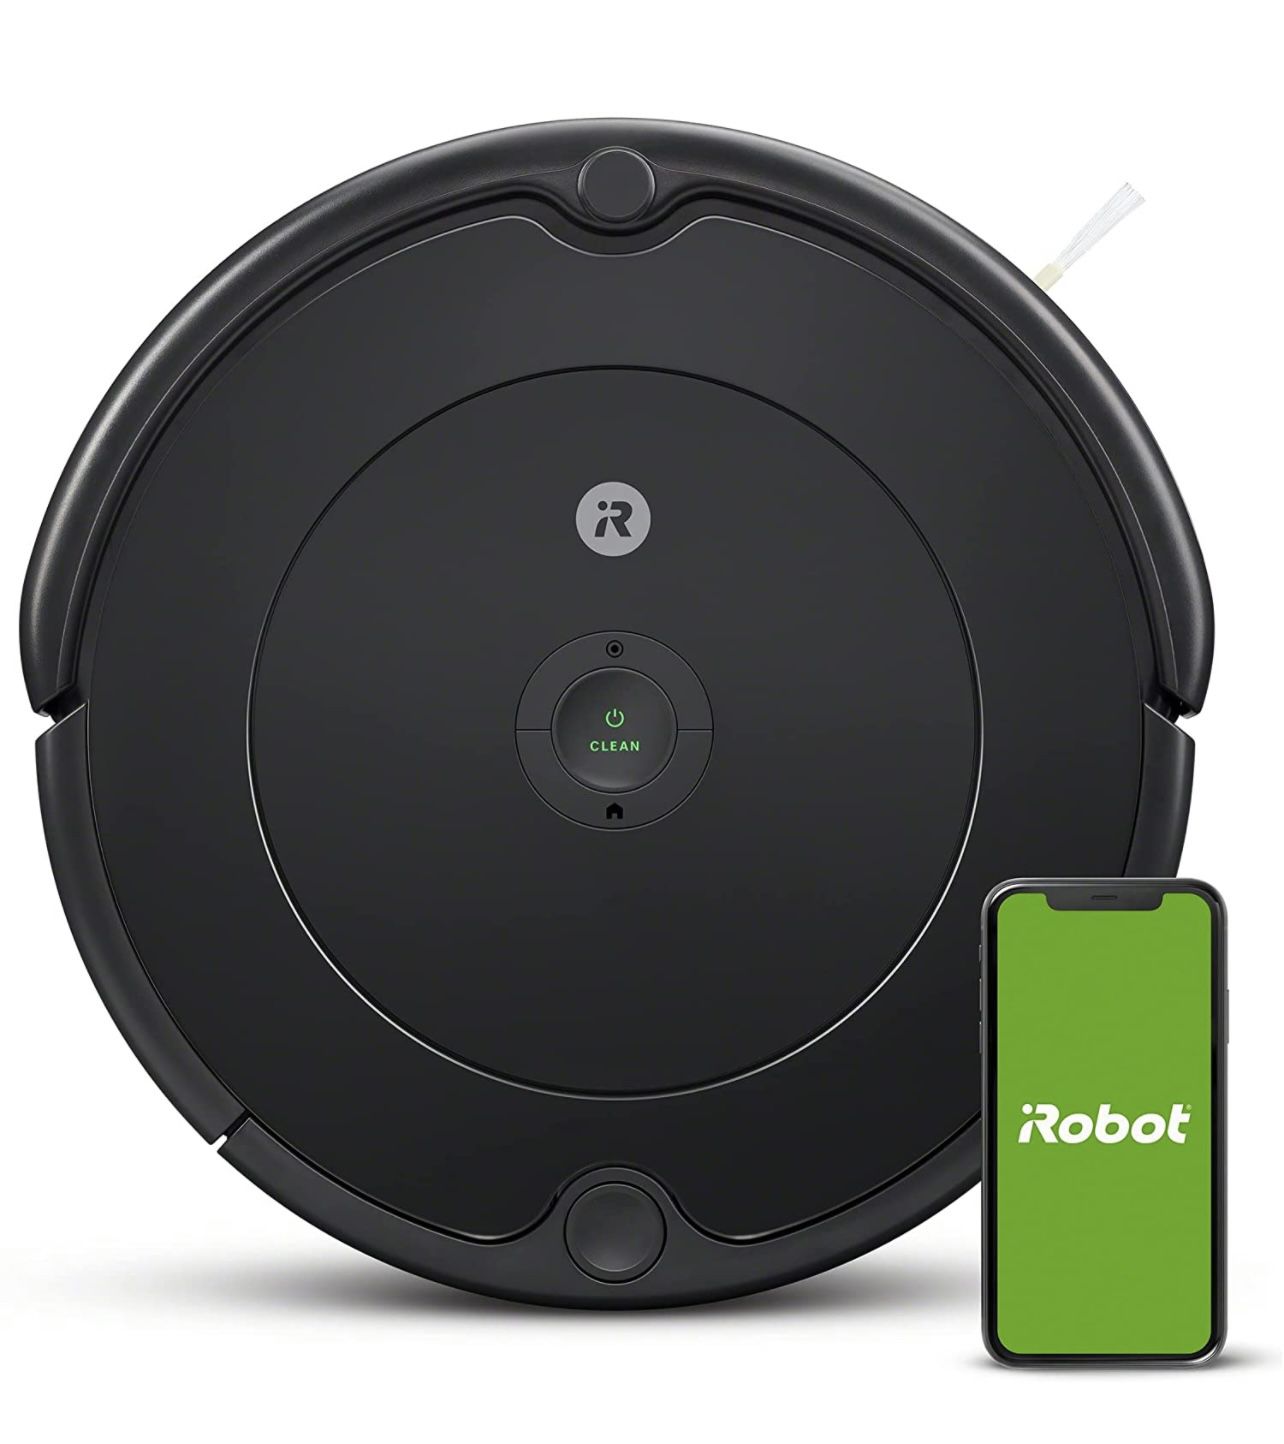 iRobot Roomba 692 Robot Vacuum-Wi-Fi Connectivity, Personalized Cleaning Recommendations, Works with Alexa, Good for Pet Hair, Carpets, Hard Floors, S